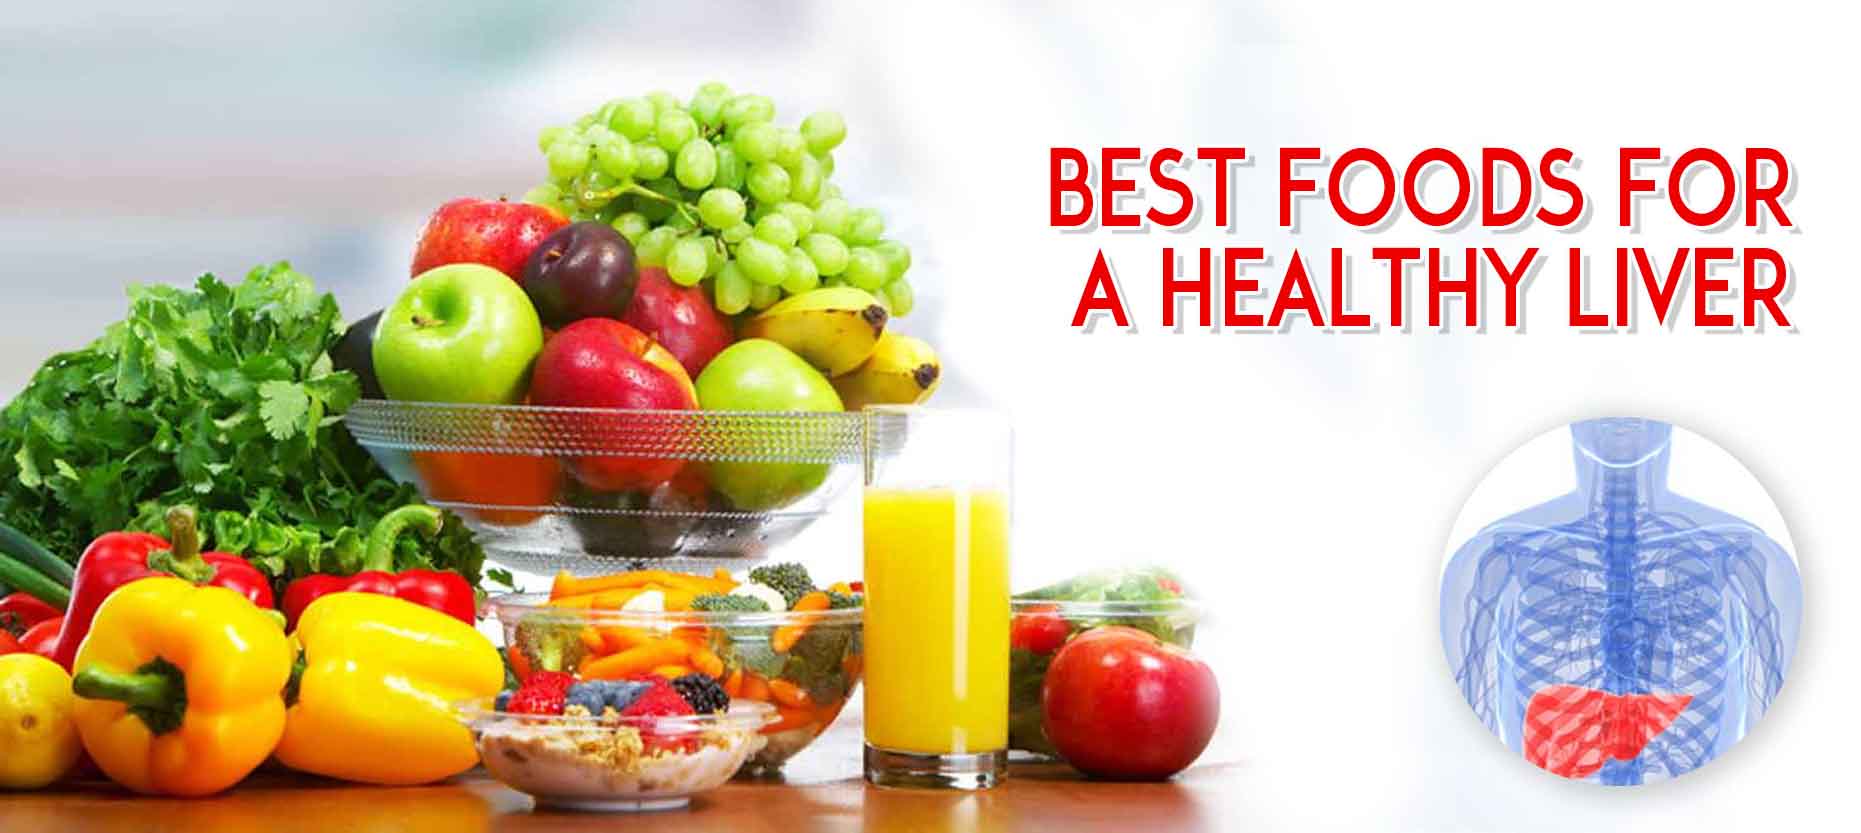 Healthy Liver: Best Foods for a Healthy Liver